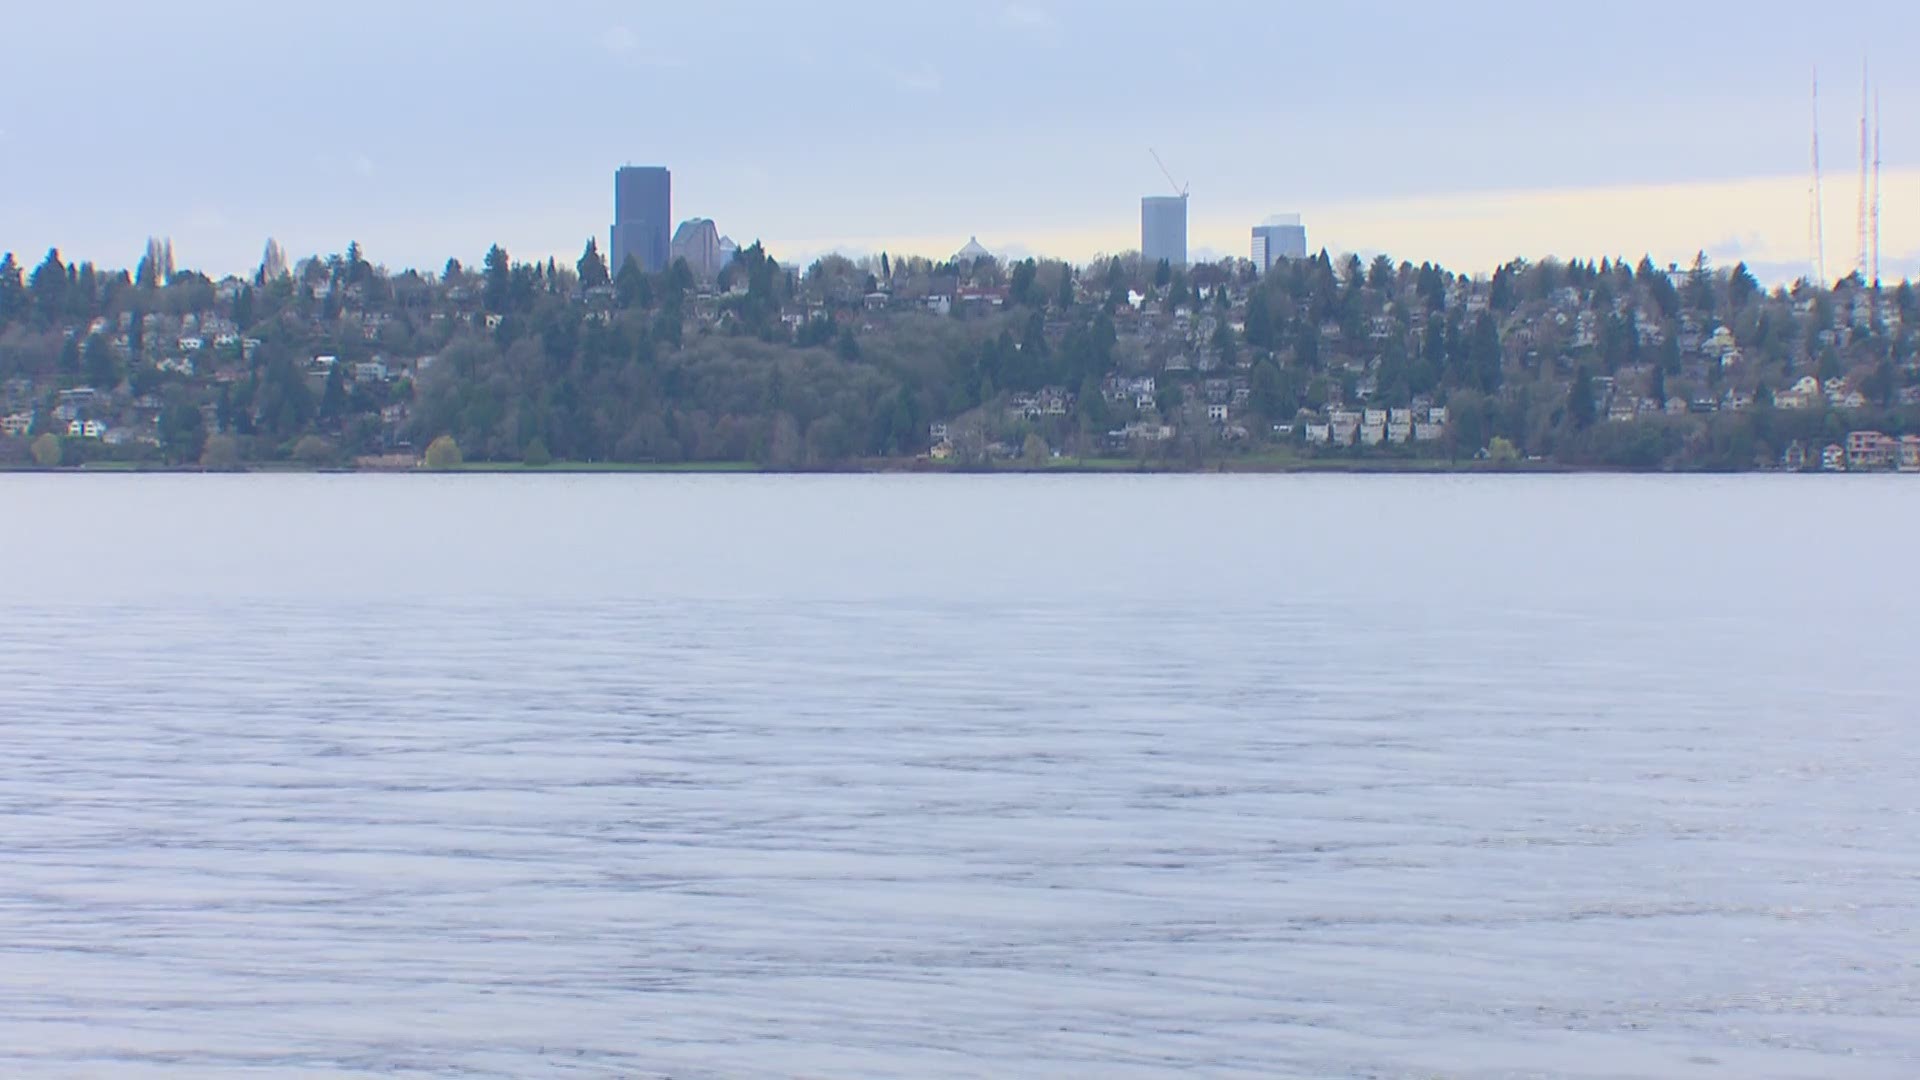 Health officials are warning people to stay away from the area beaches and bodies of water where the region's record-breaking rainstorms have caused sewage spills.